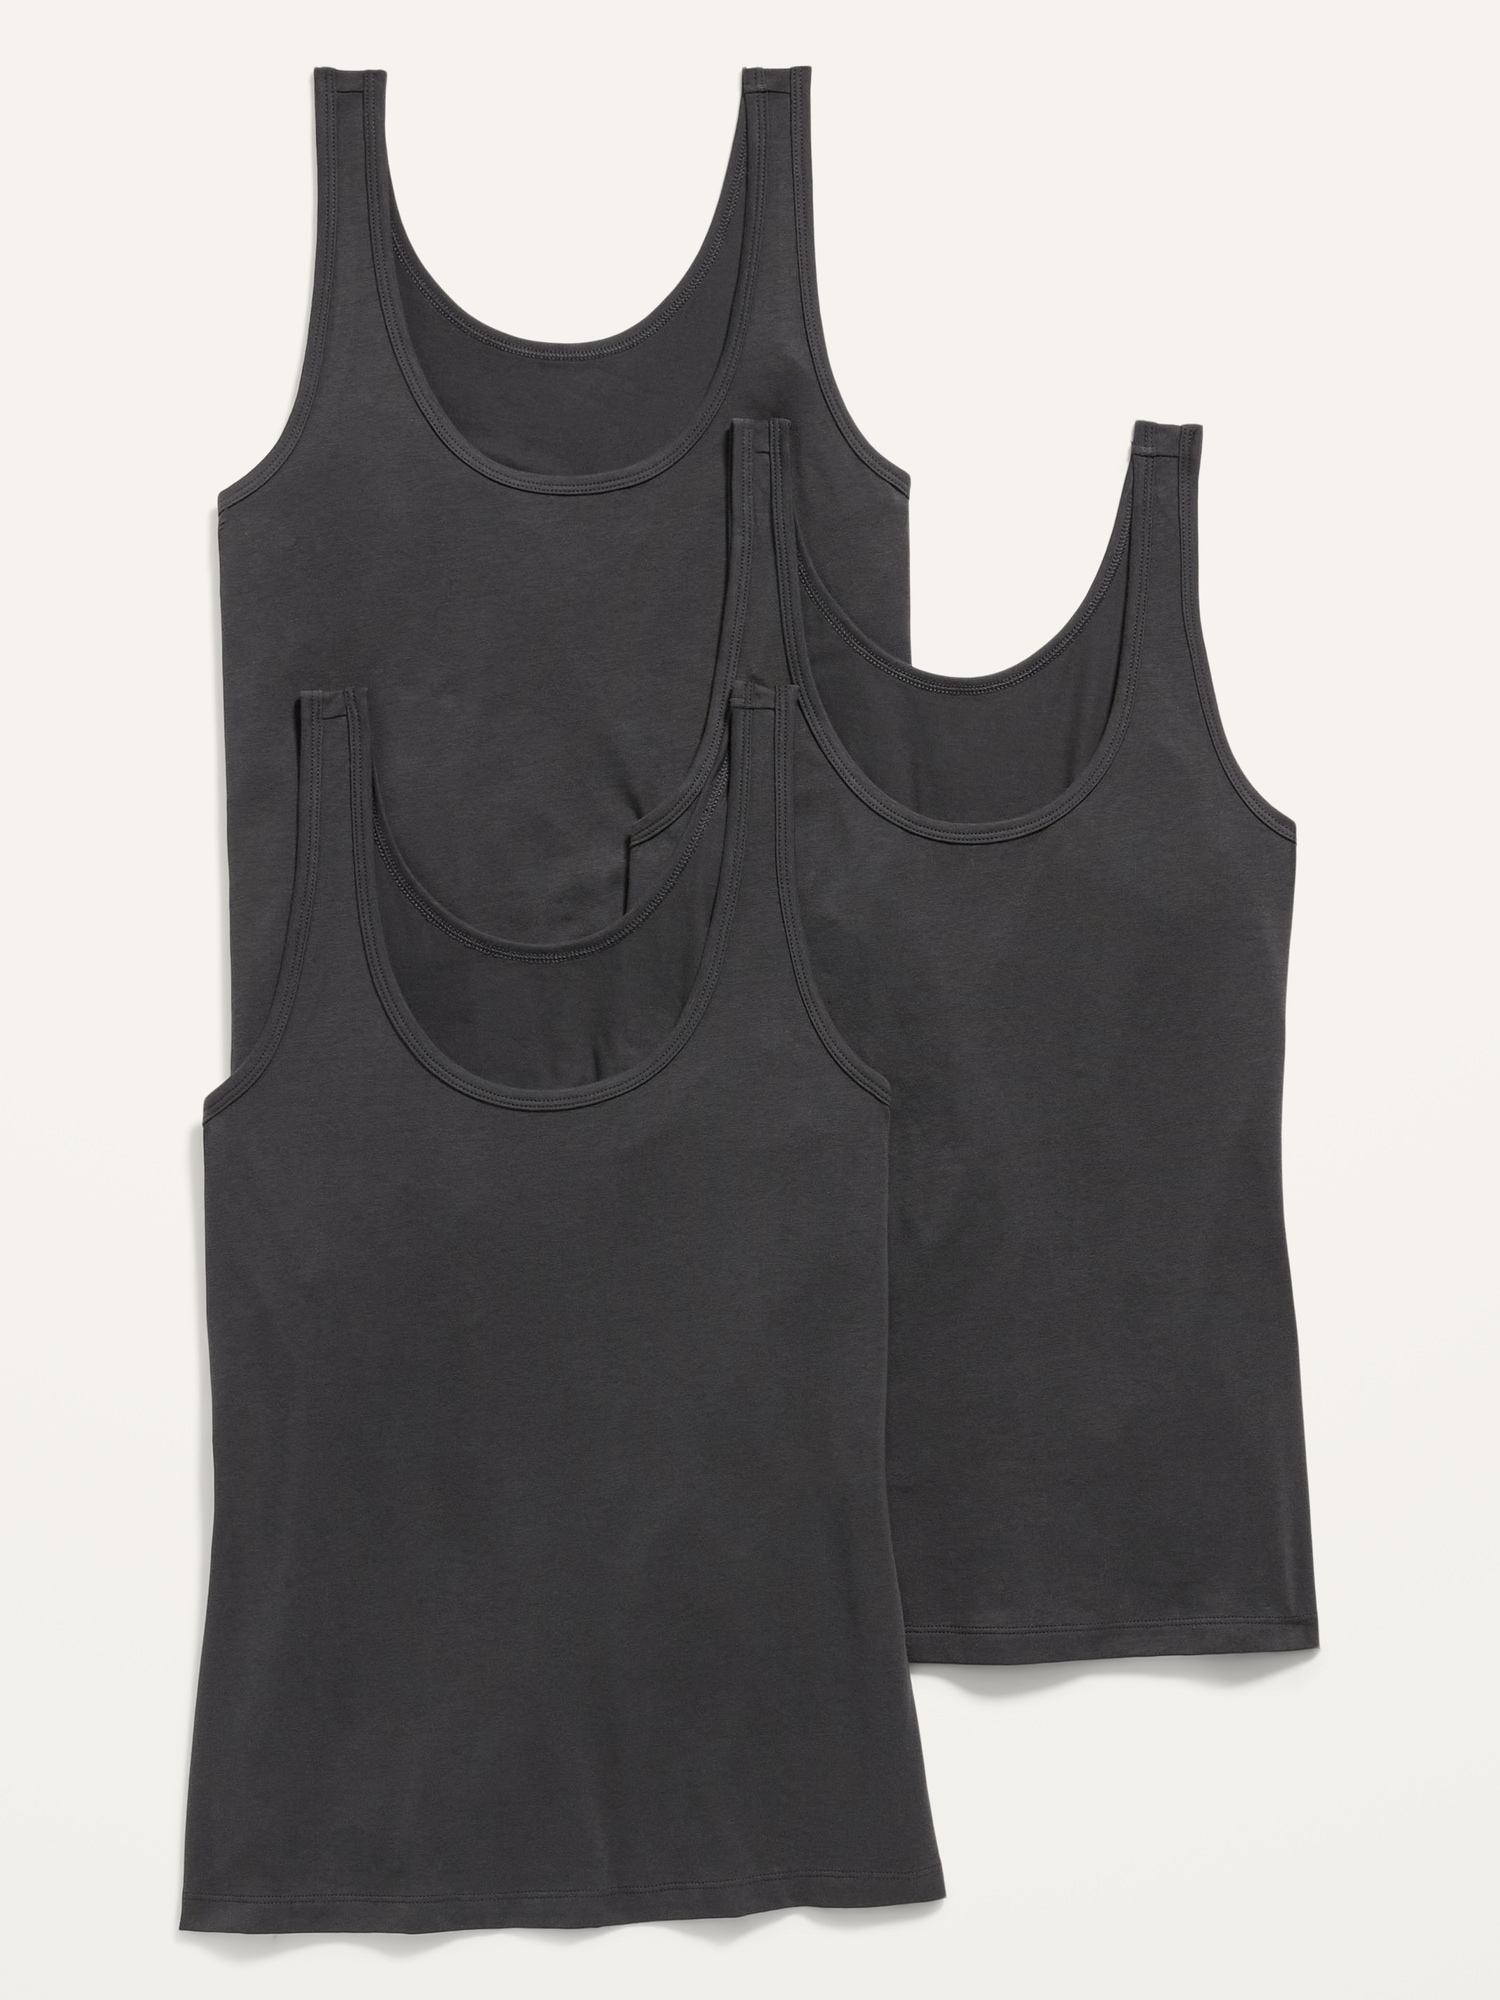 Old Navy First-Layer Tank Top 3-Pack for Women black. 1